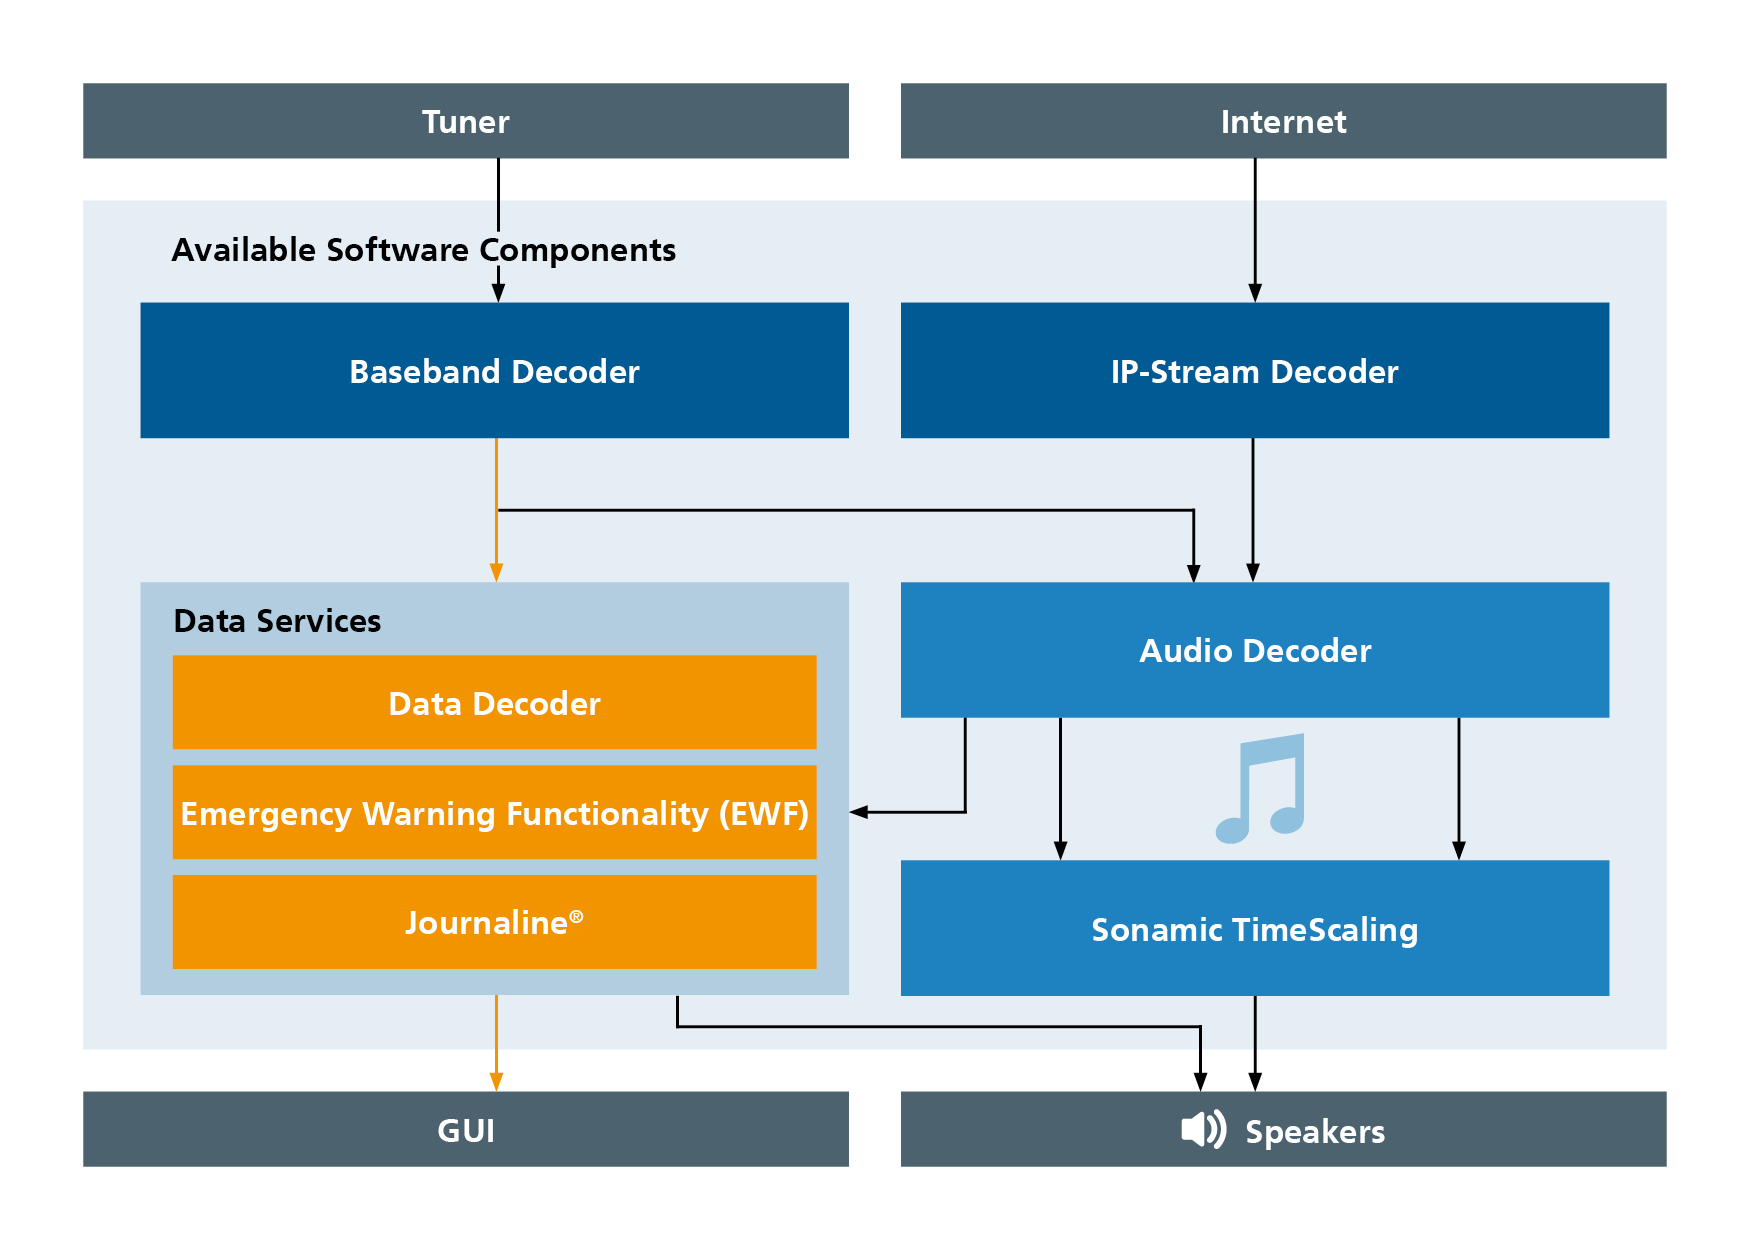 Overview of available software components for hybrid radios from Fraunhofer IIS